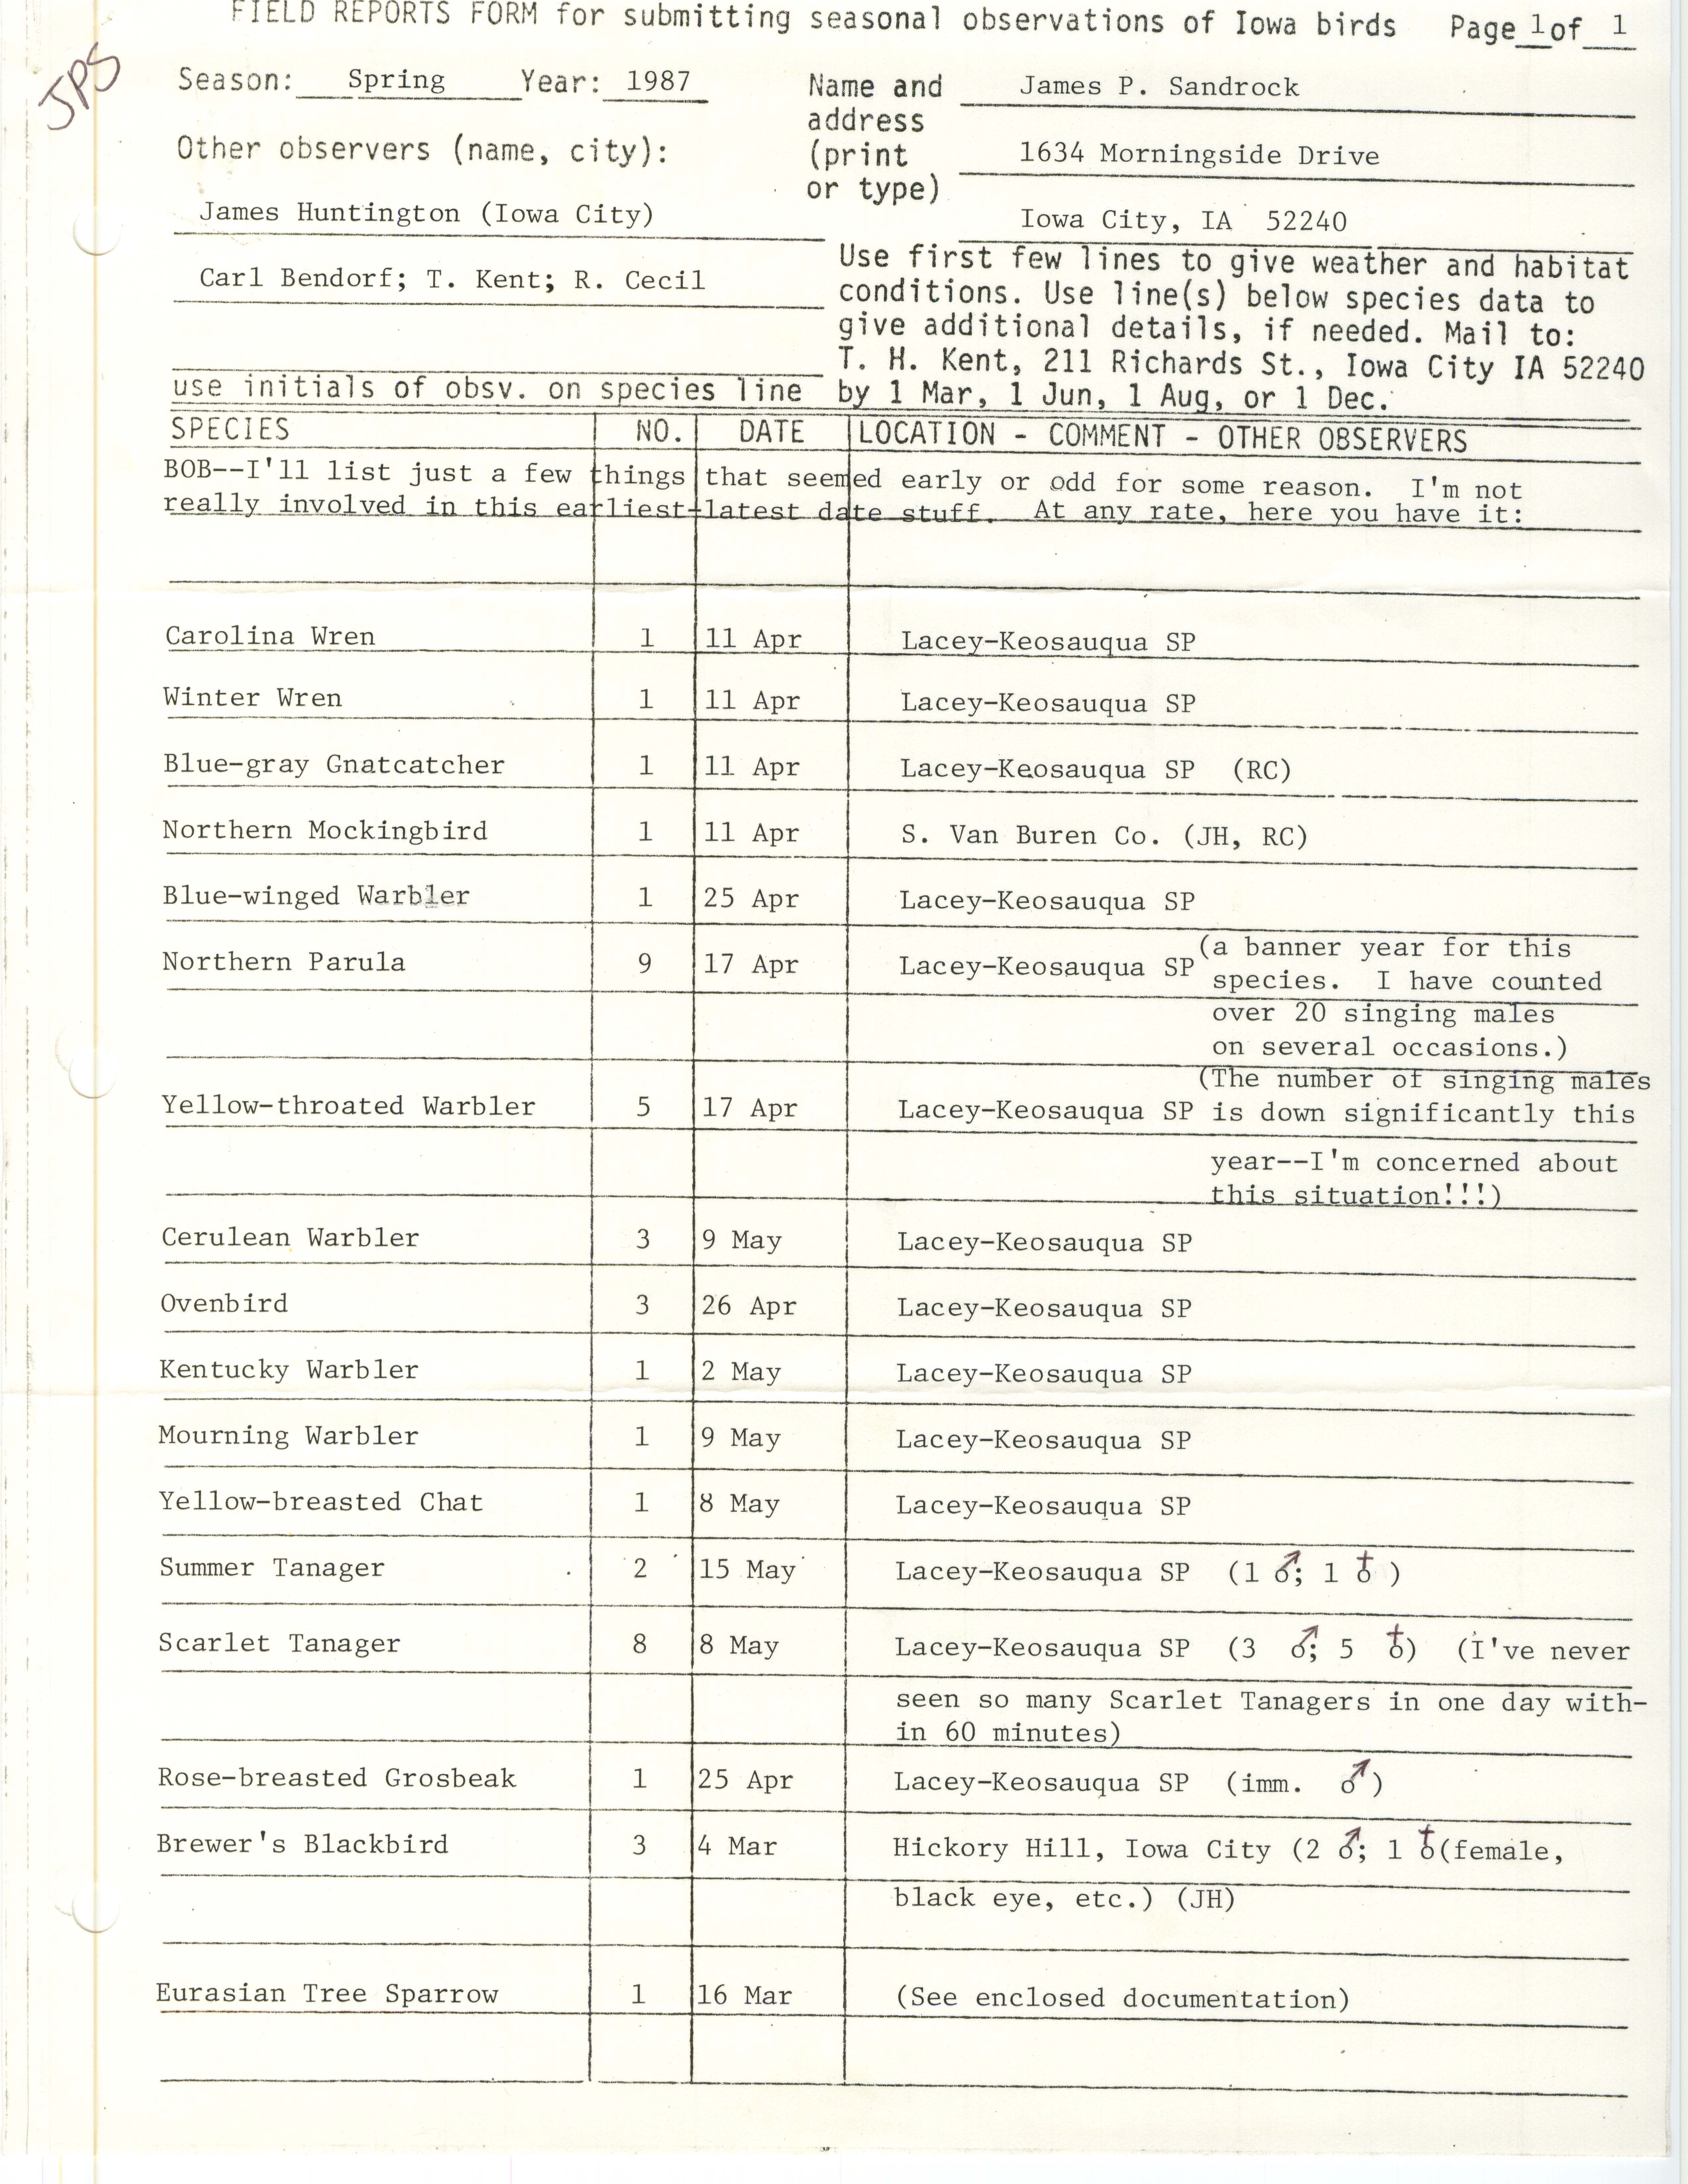 Field reports form for submitting seasonal observations of Iowa birds, James P. Sandrock, spring 1987